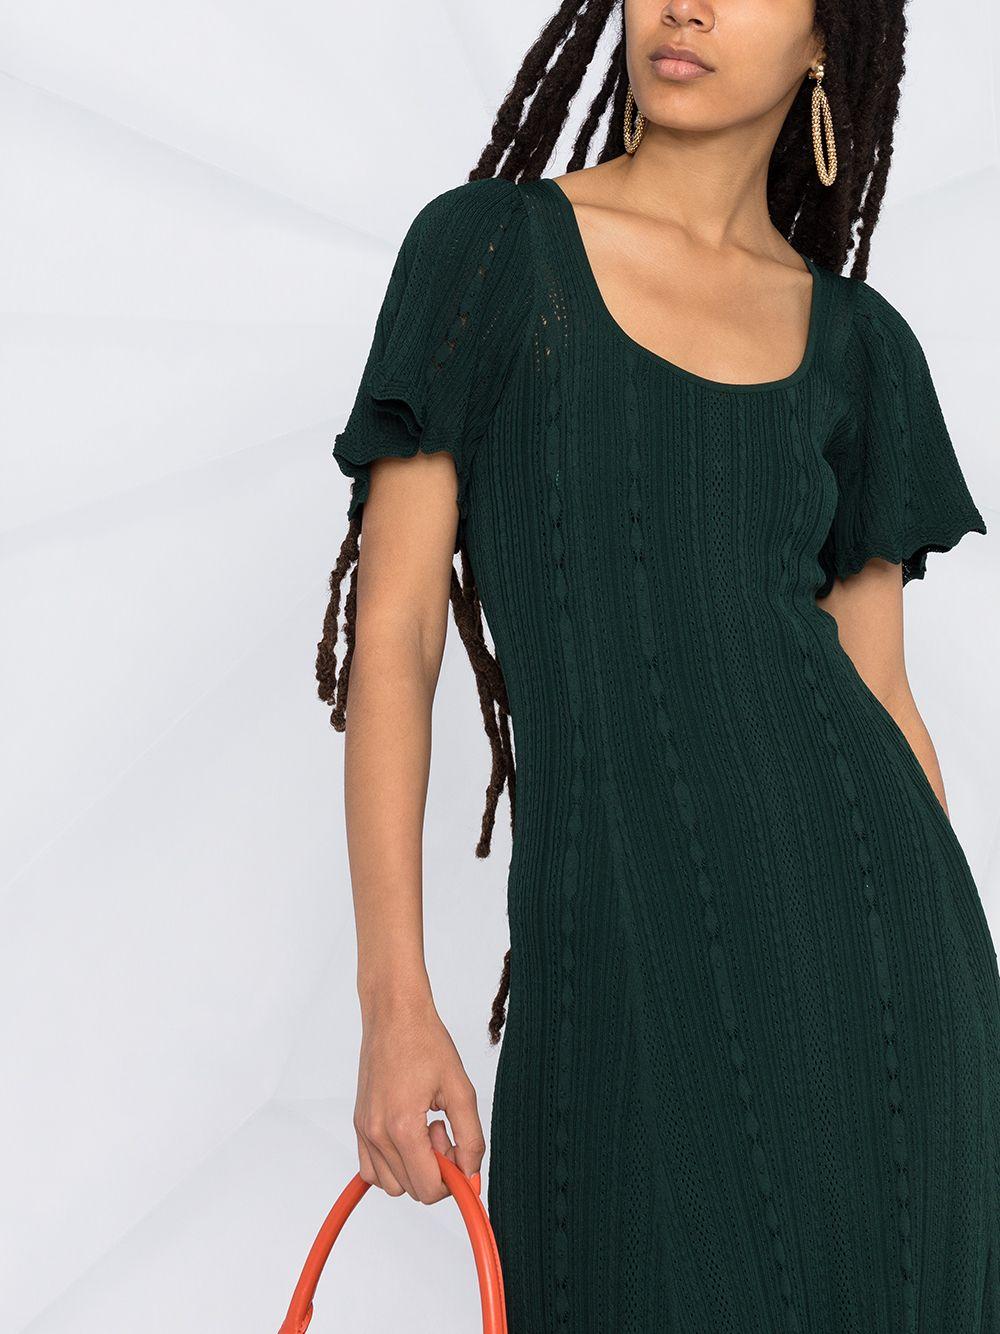 Sandro Marly Knitted Dress in Green | Lyst UK